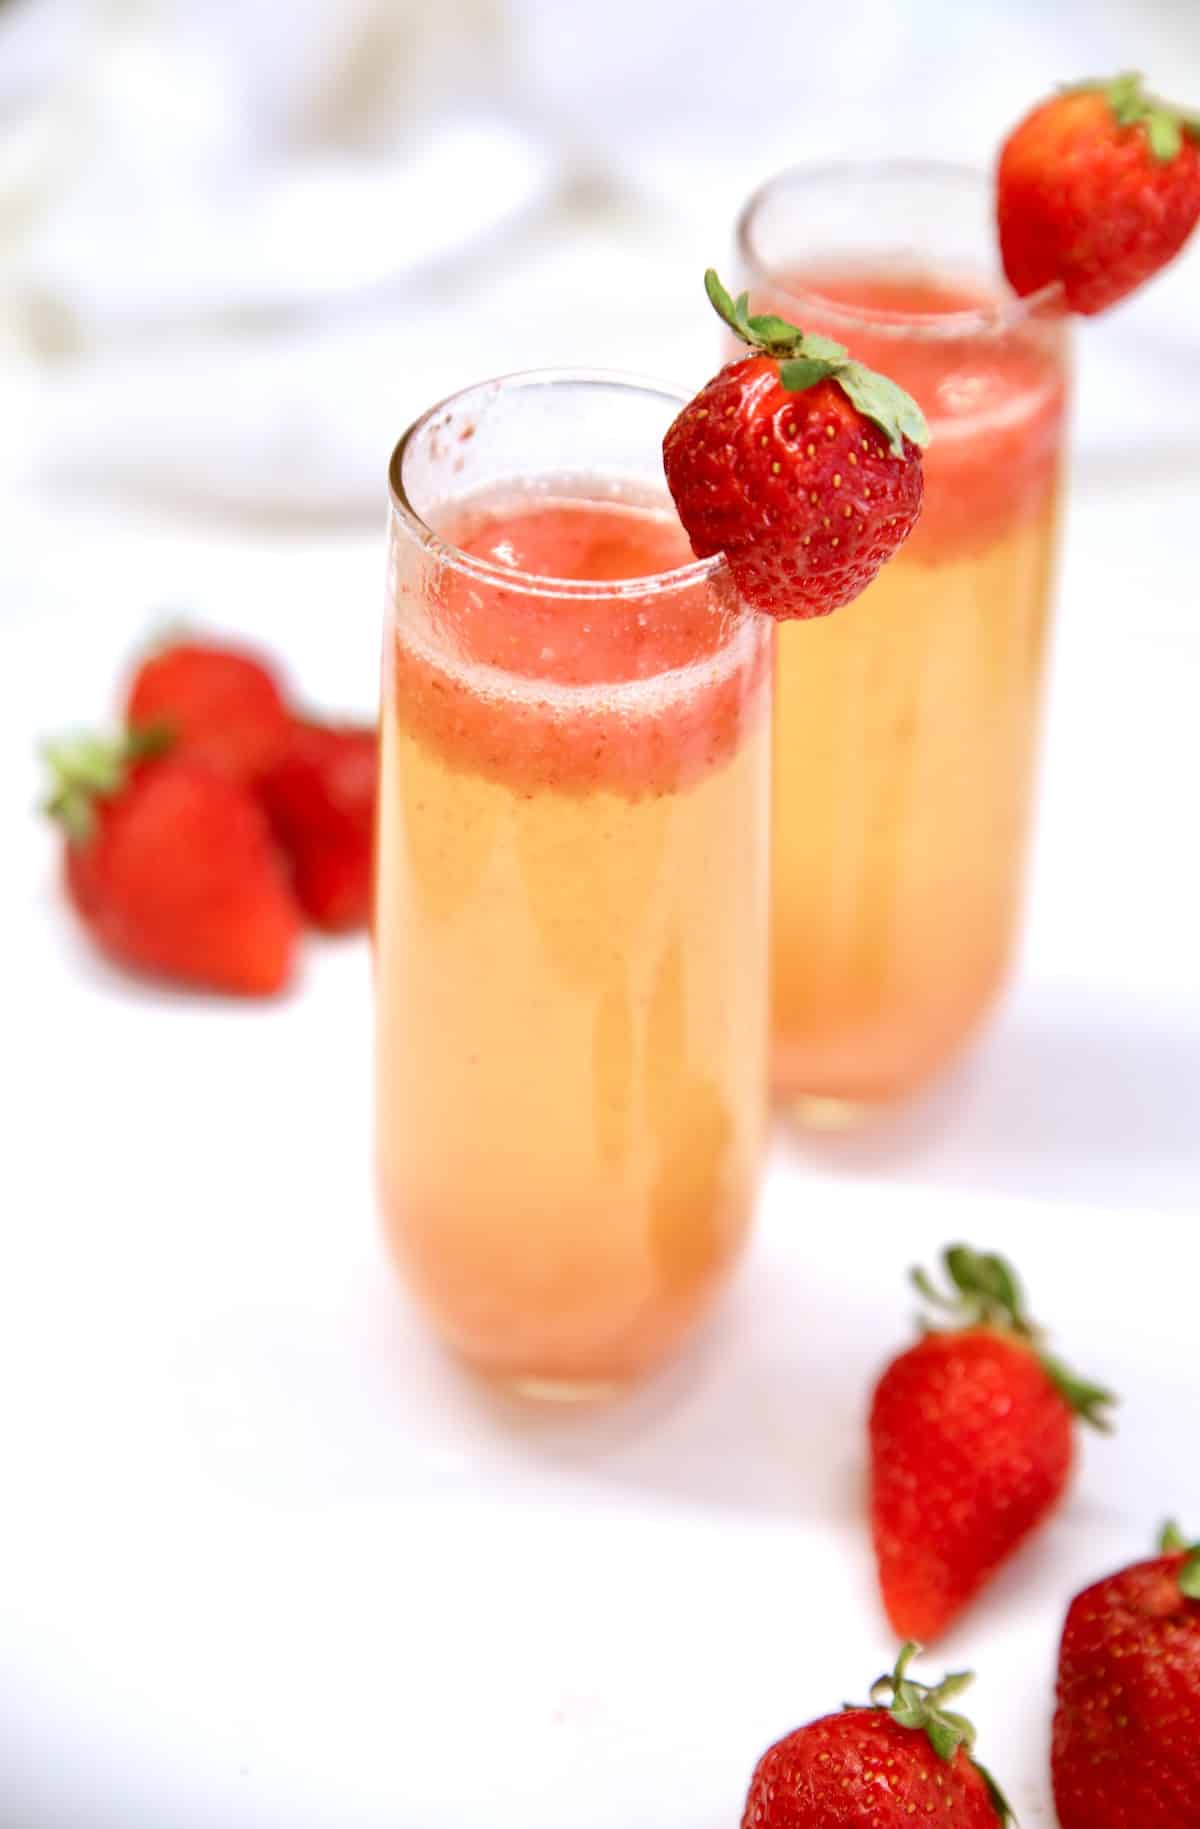 Strawberry champagne cocktails with strawberry garnish.